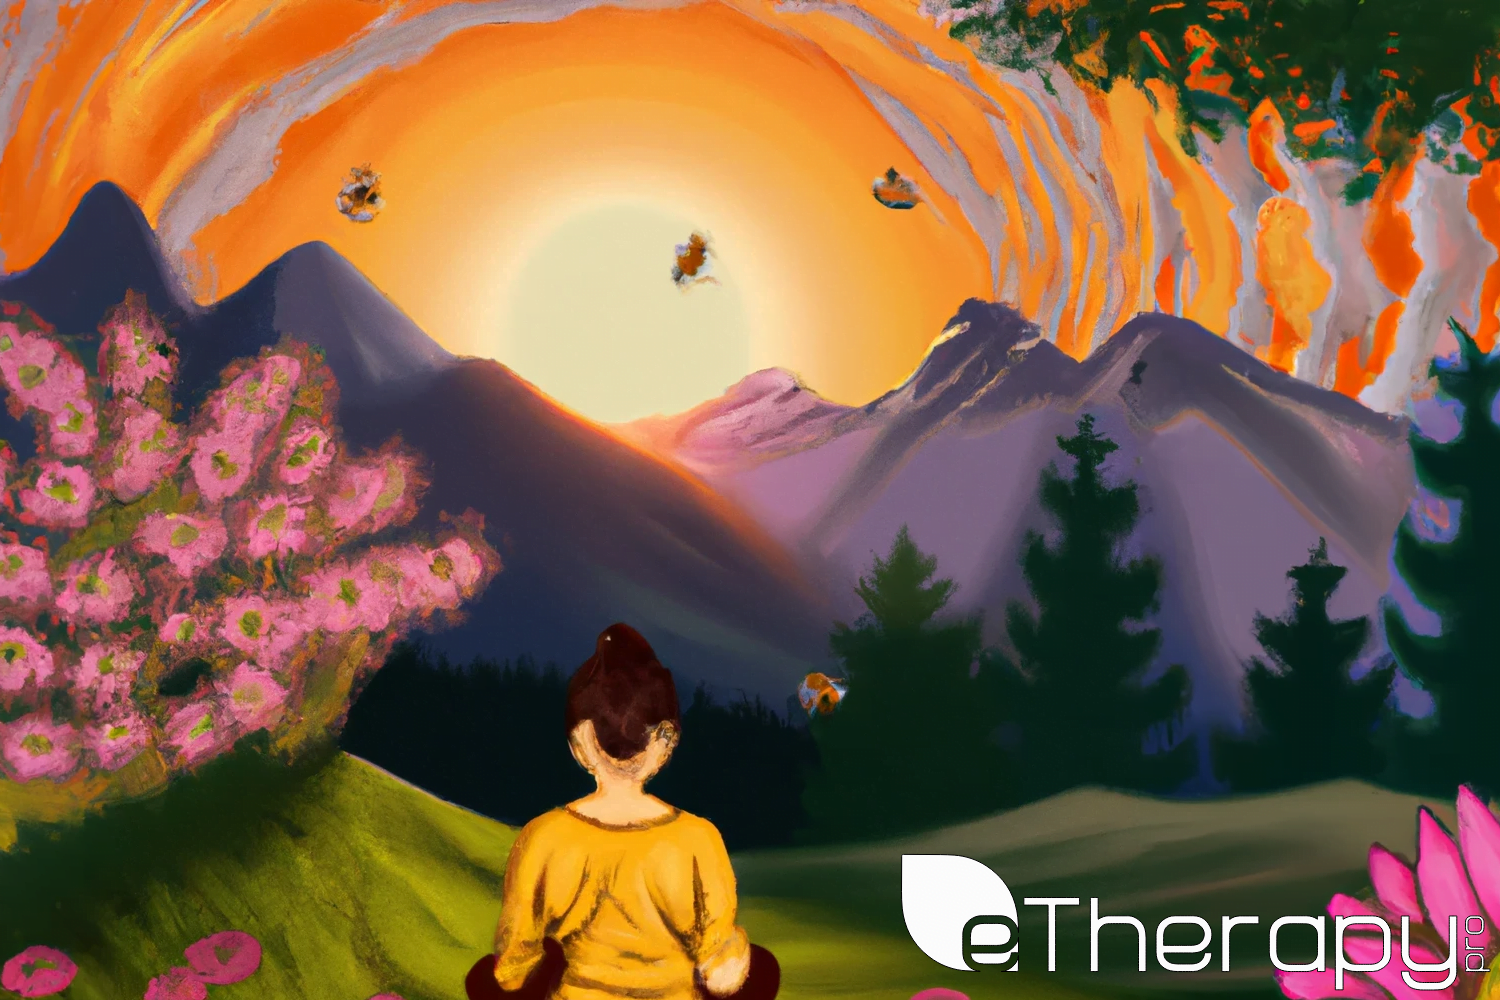 A person peacefully meditating, with flowers, bees, butterflies, trees around them. mountains in the distance and a beautiful sunset - Can Surrounding Yourself with Positivity Change Your Life